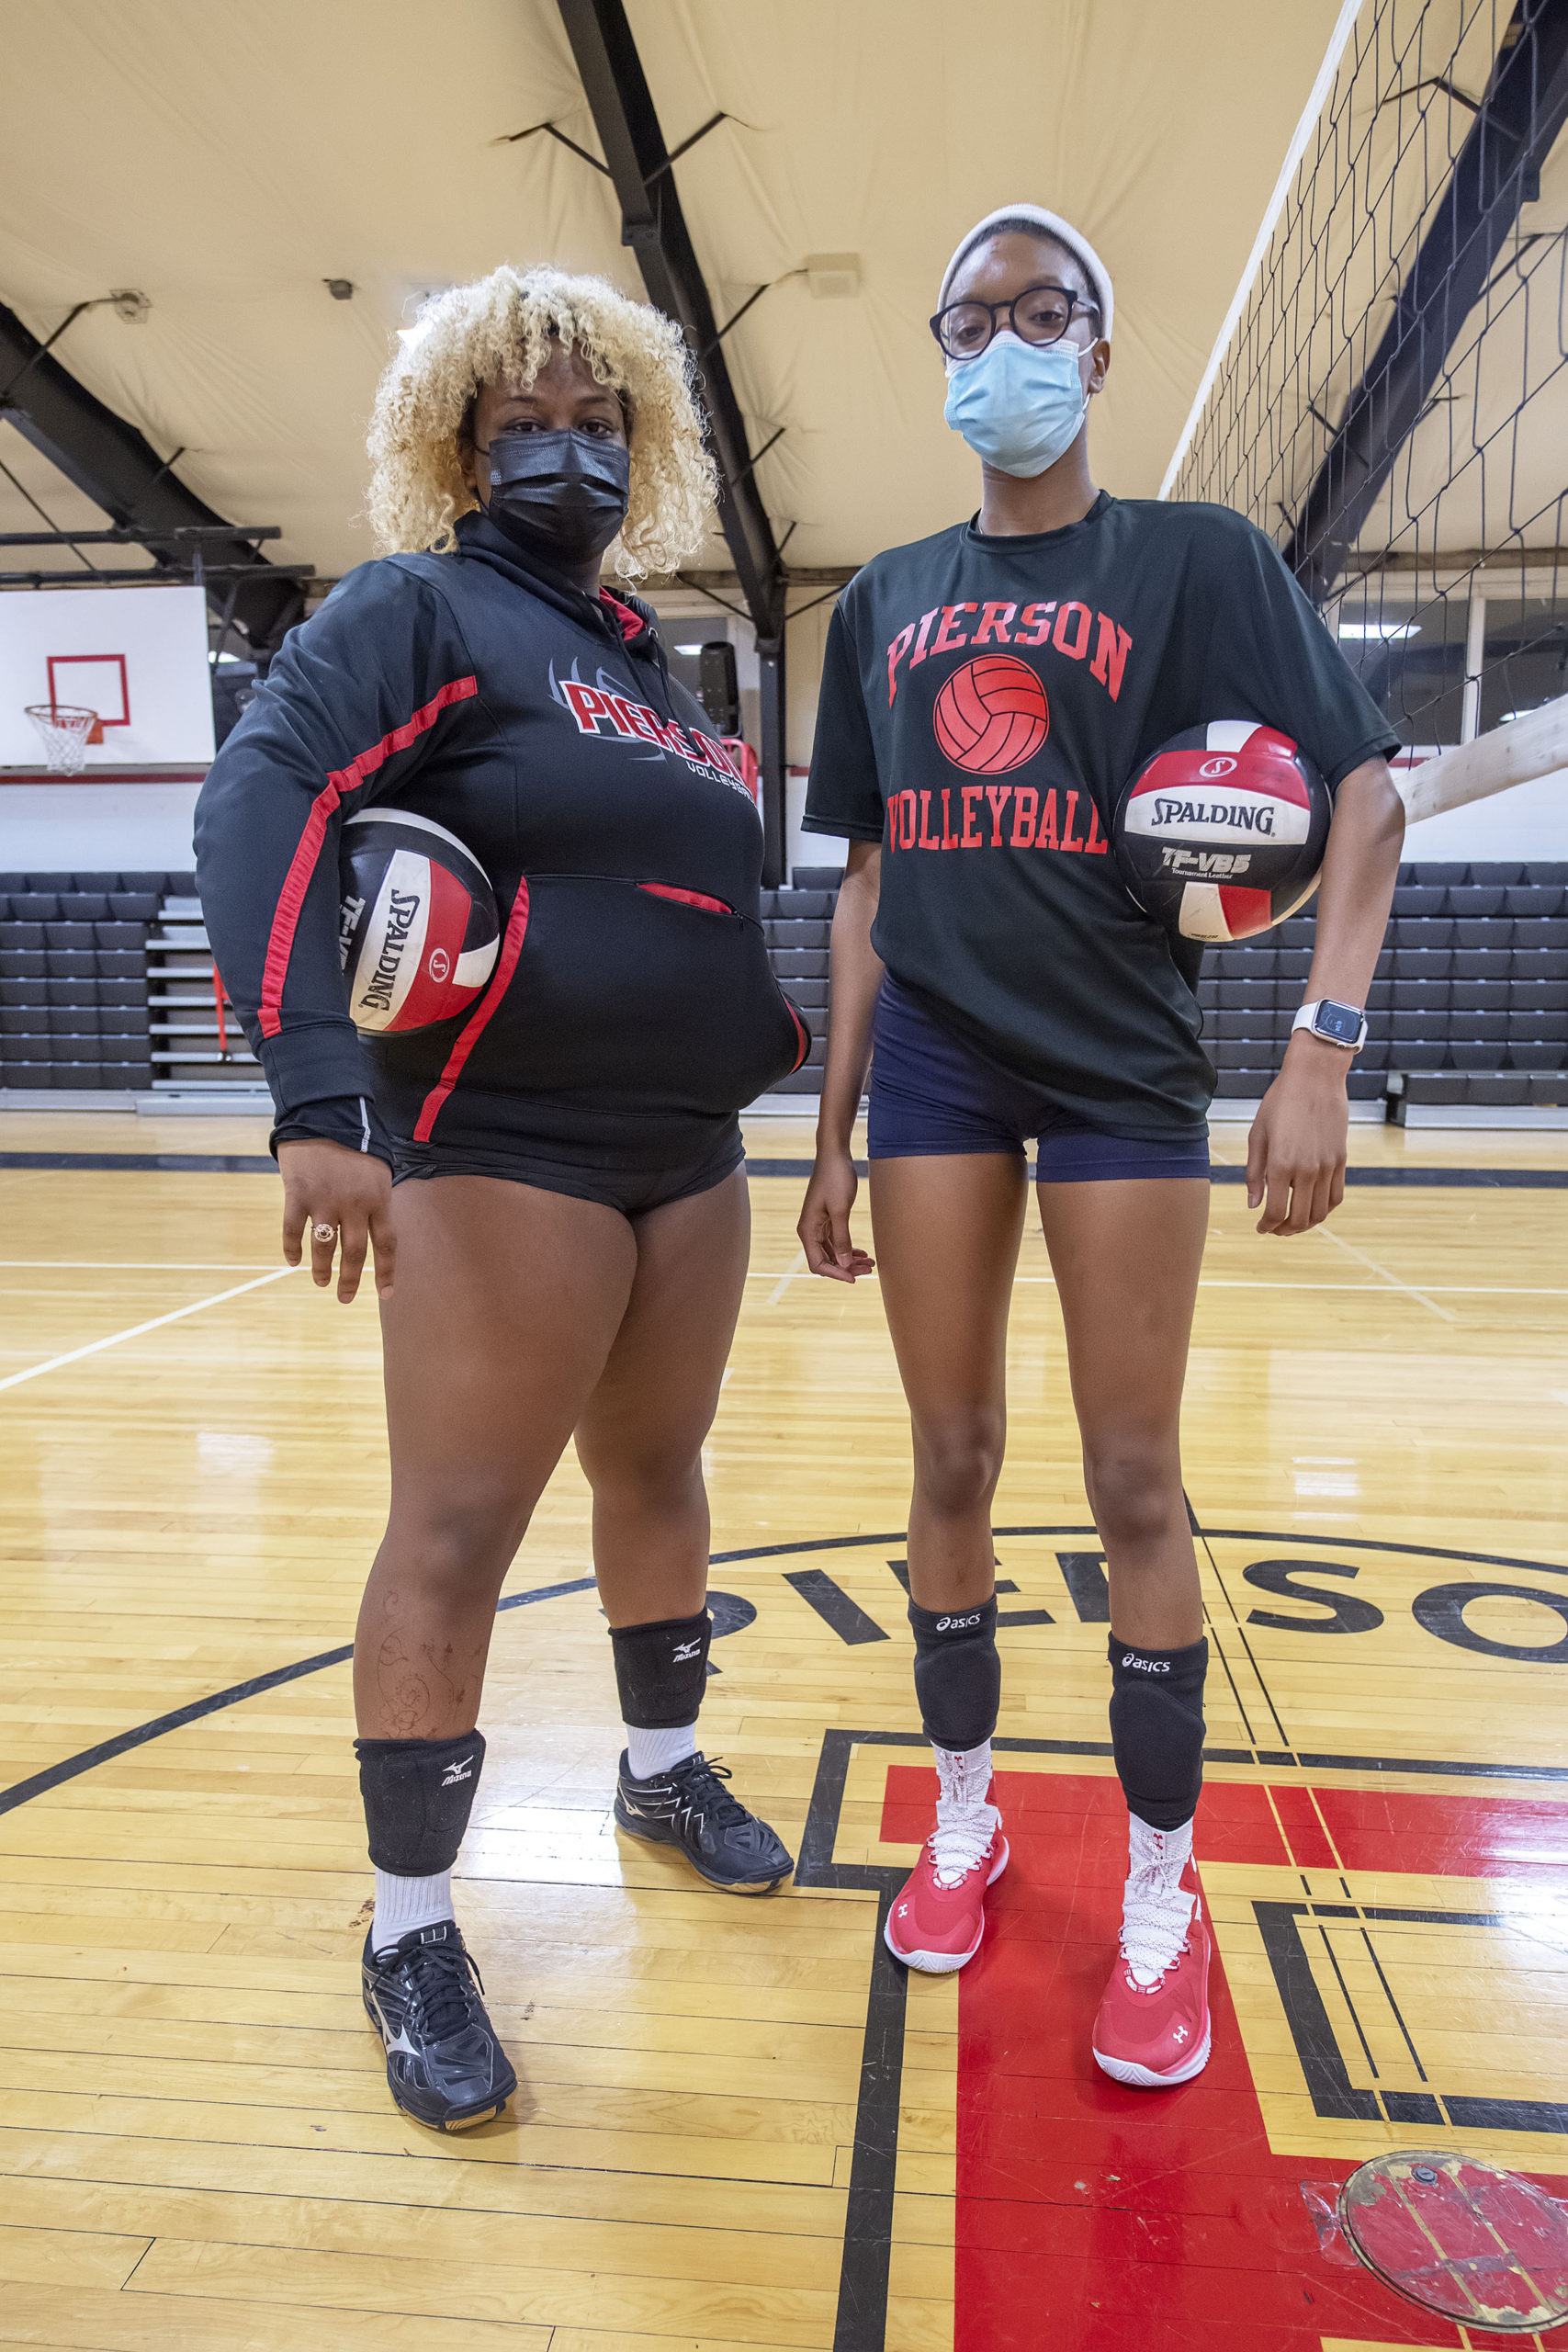 The Pierson girls volleyball team returns seniors Ngelika Tobias-Narvaez, left, and Gylia Dryden, as well as Lilith Bastek-Ochoa, who is not pictured.